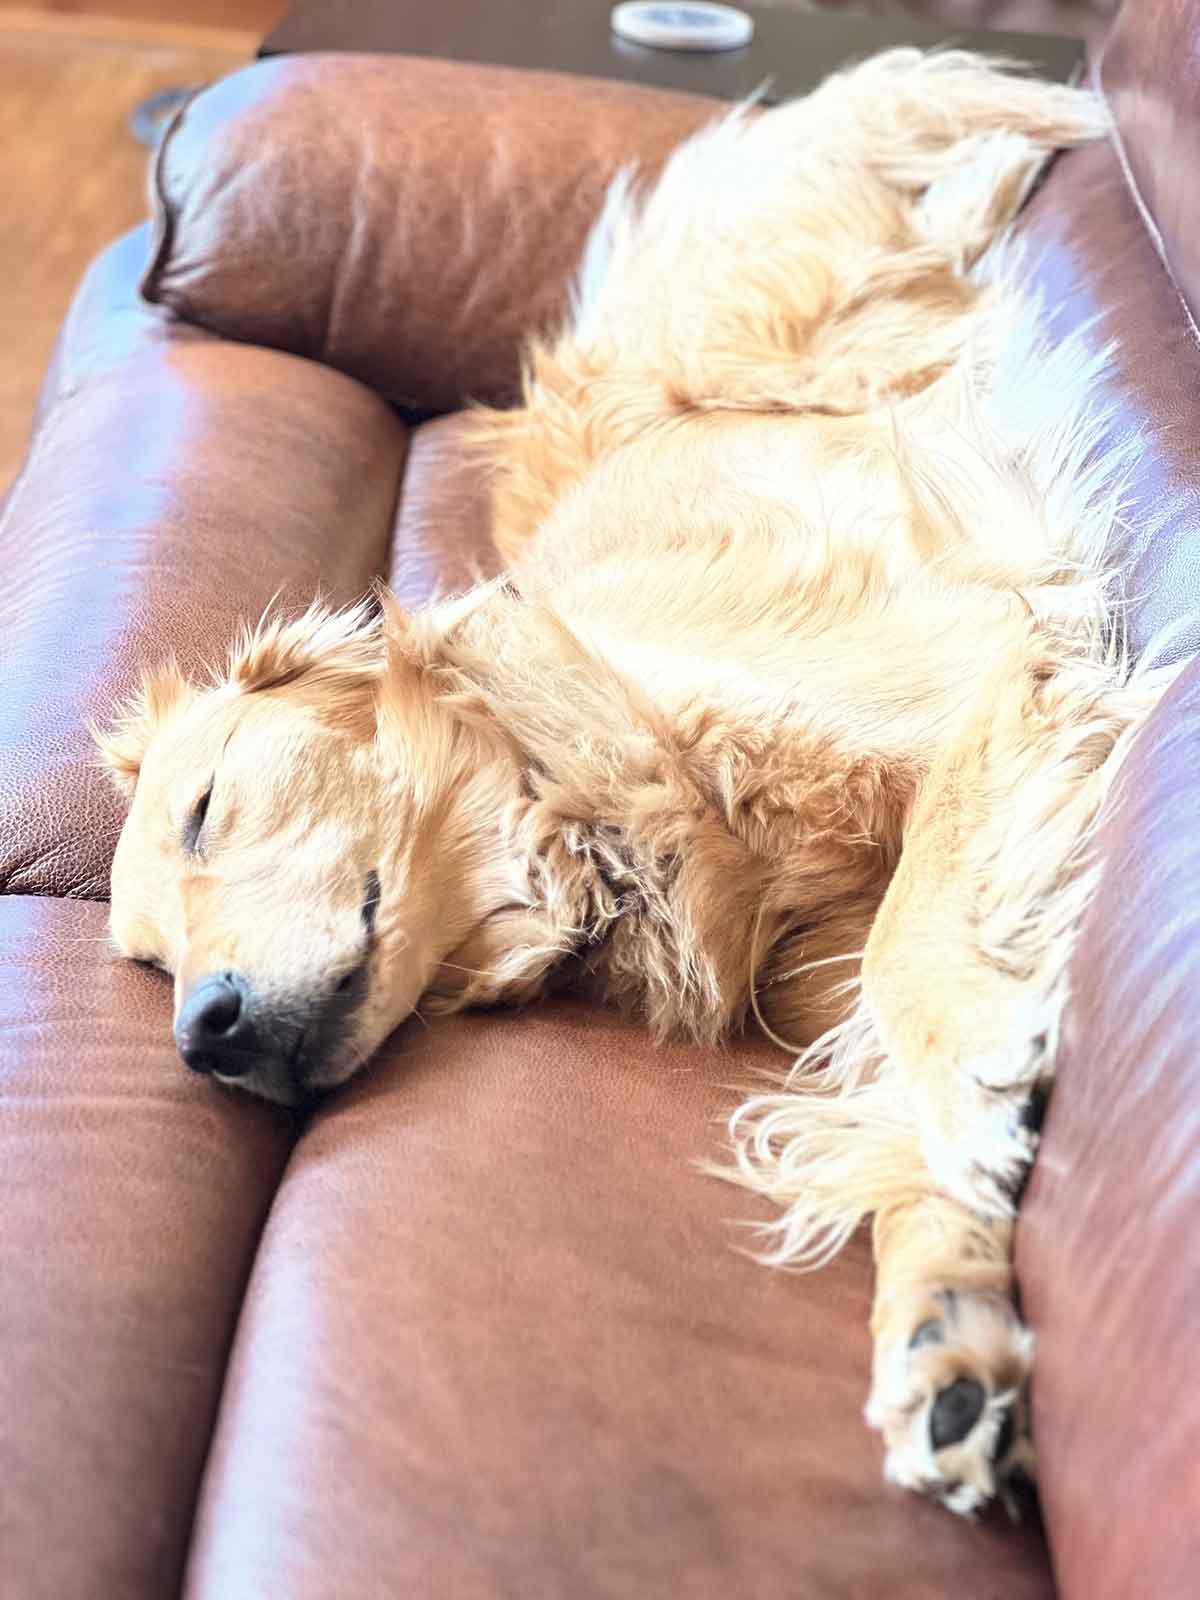 Dog sleeping on a couch.